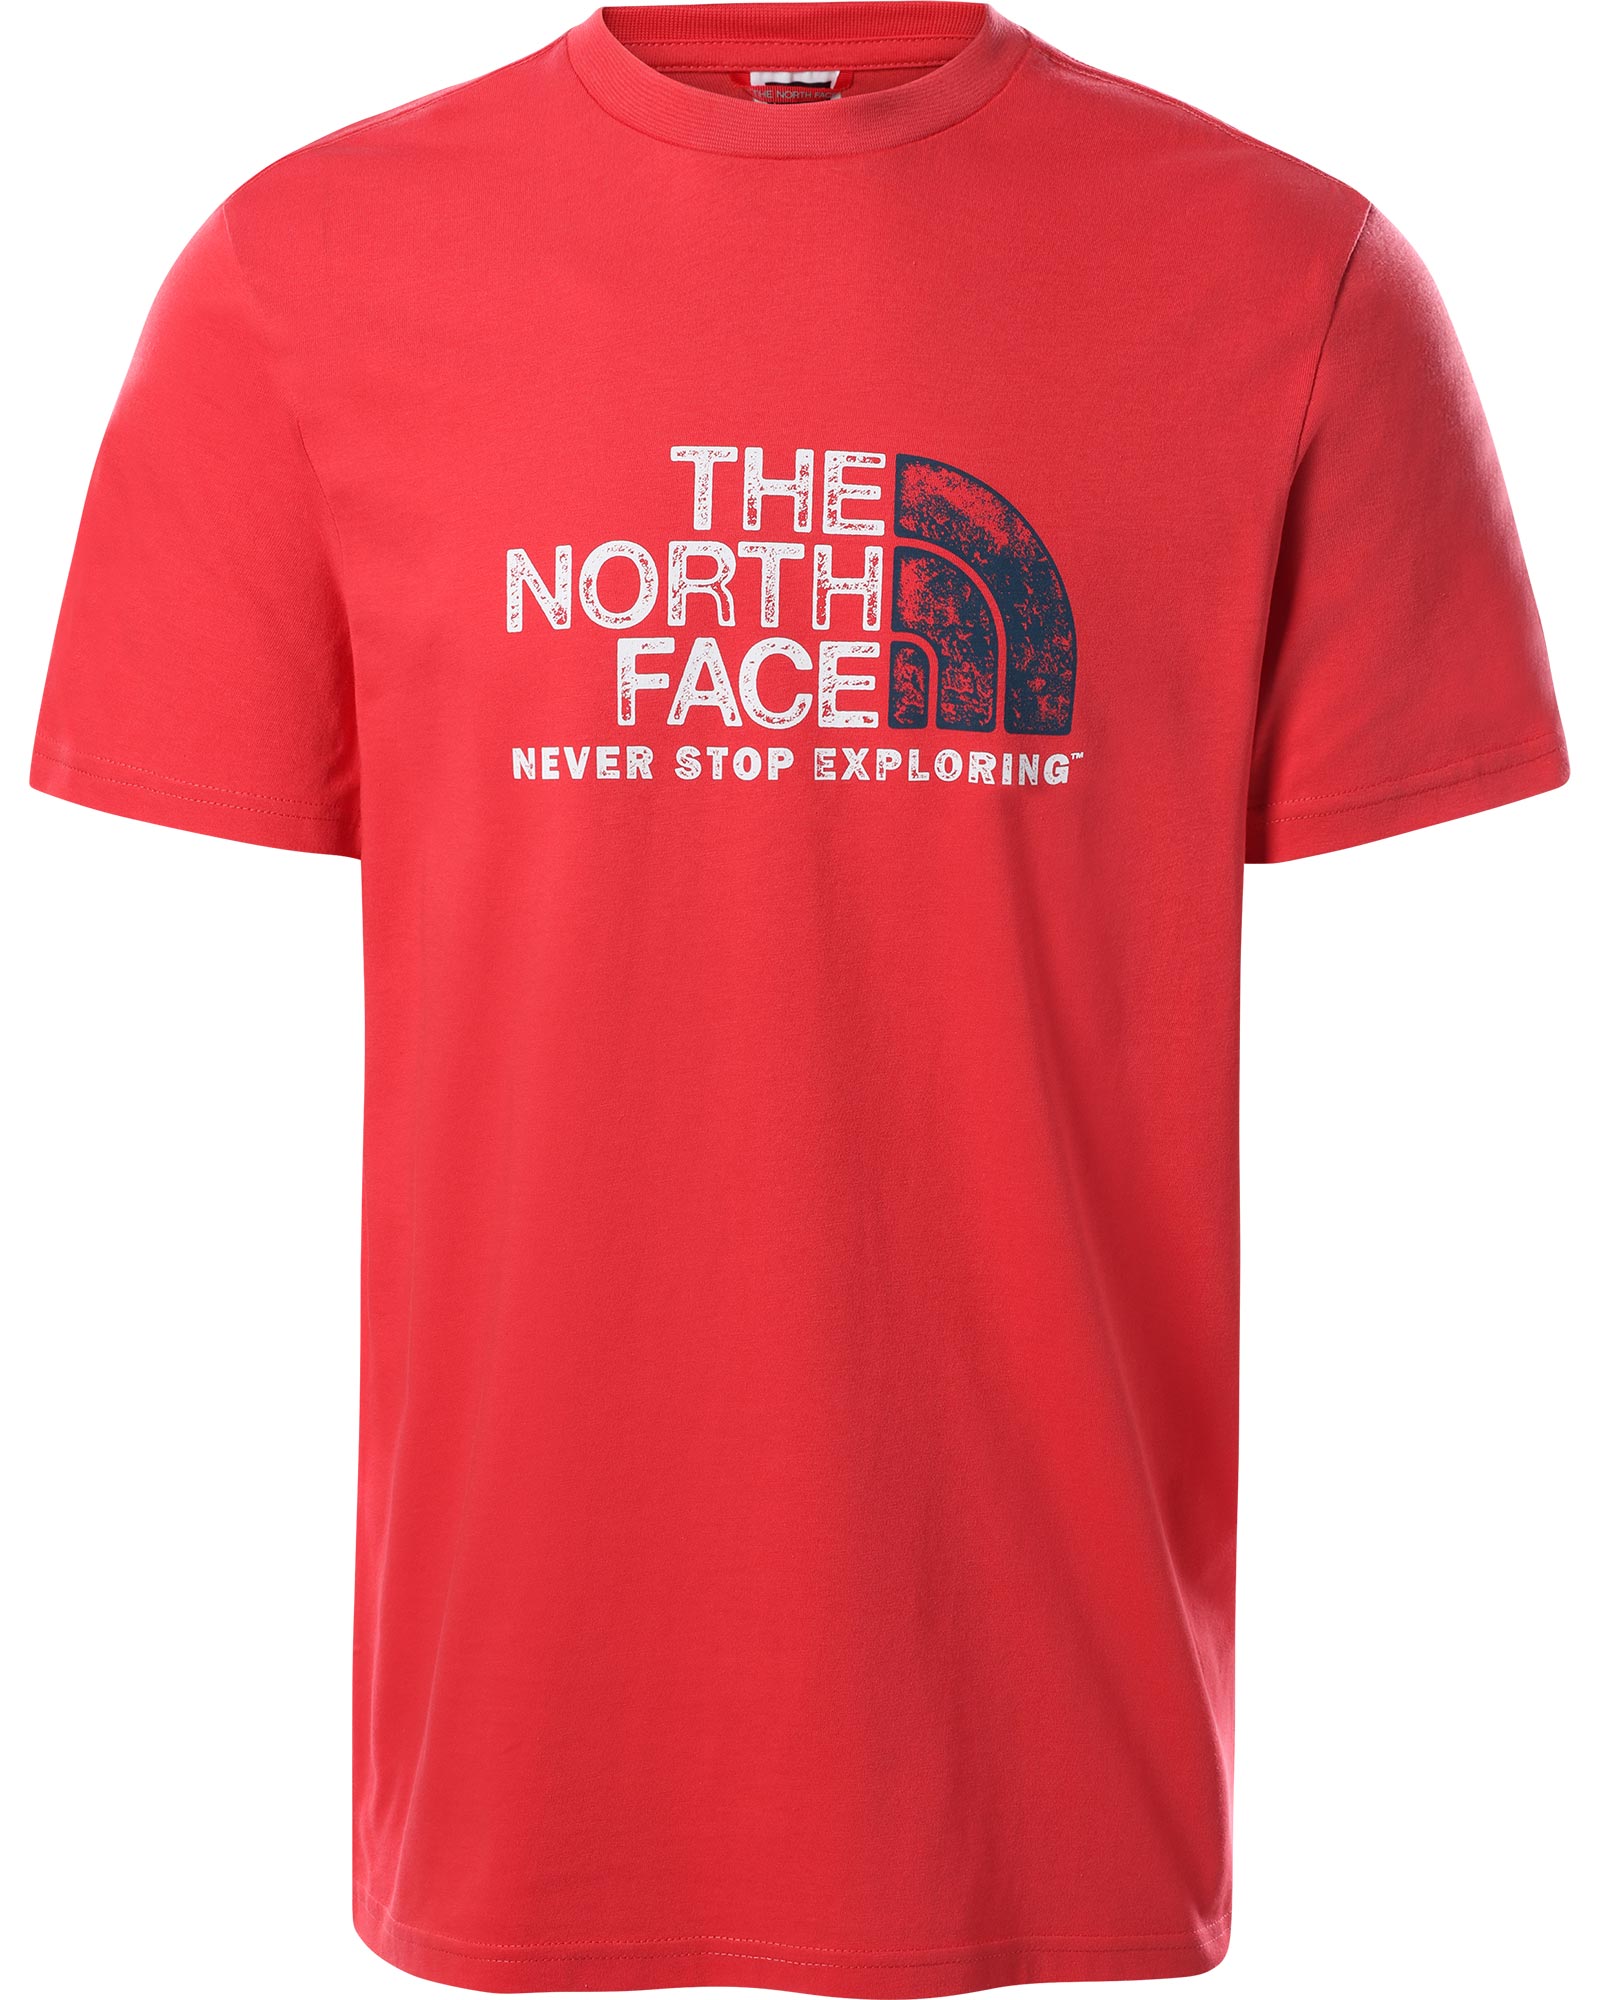 The North Face Men's Rust T-Shirt